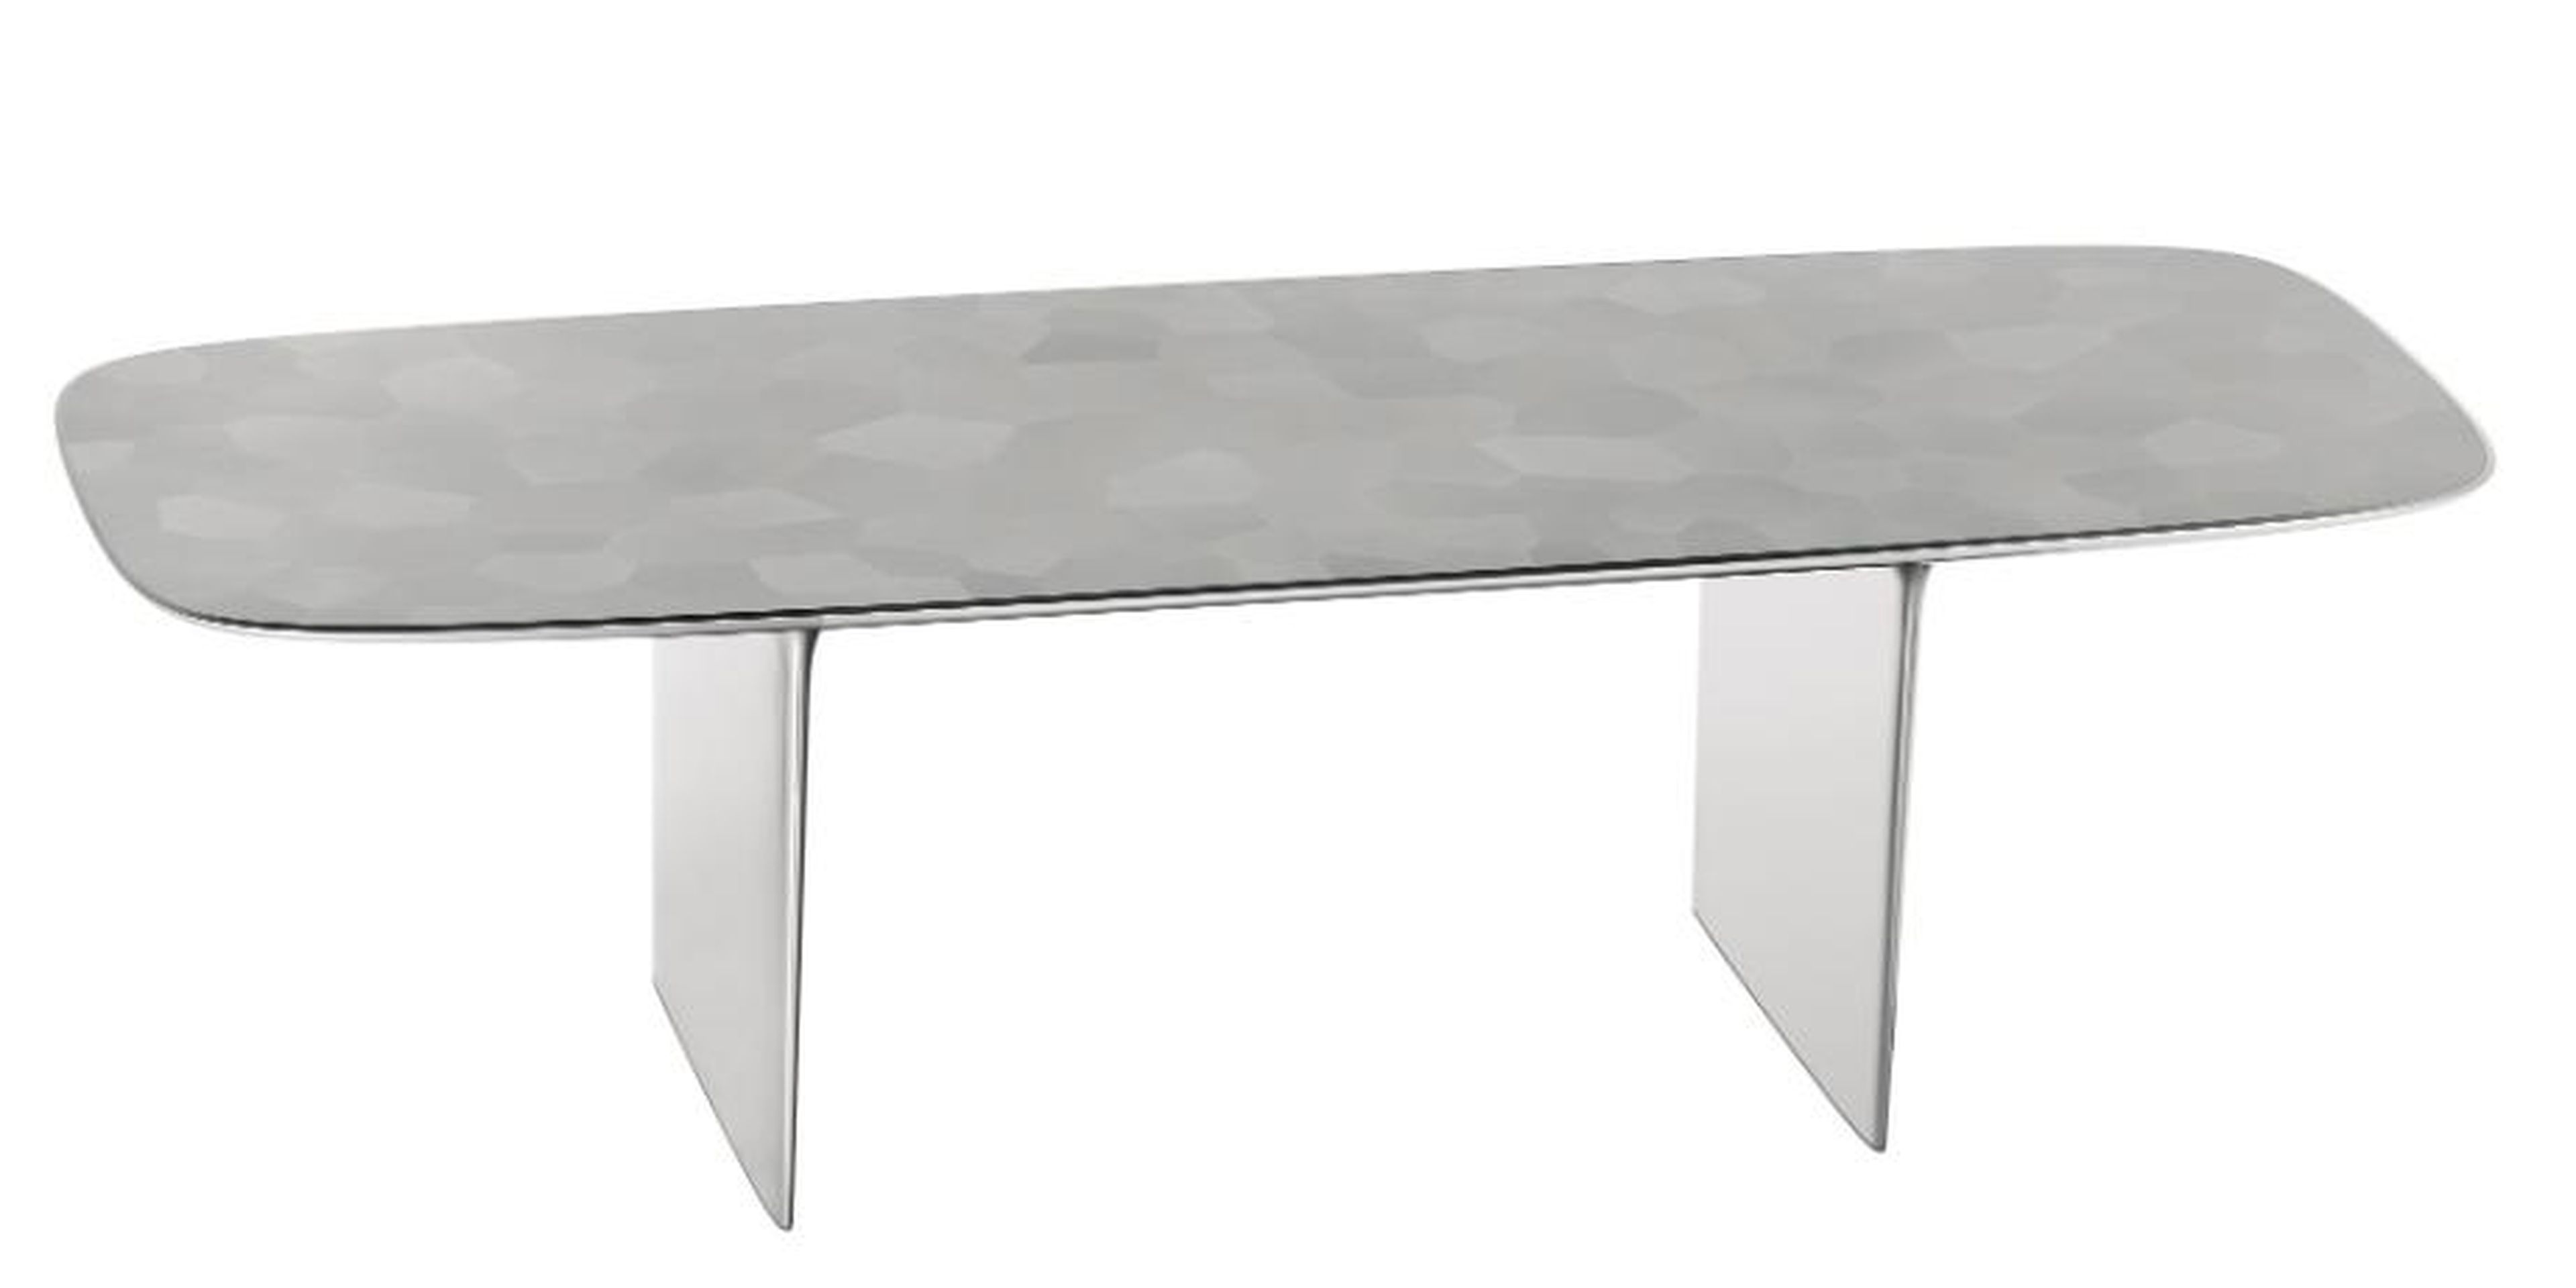 And this desk, which sold for $1.685 million.